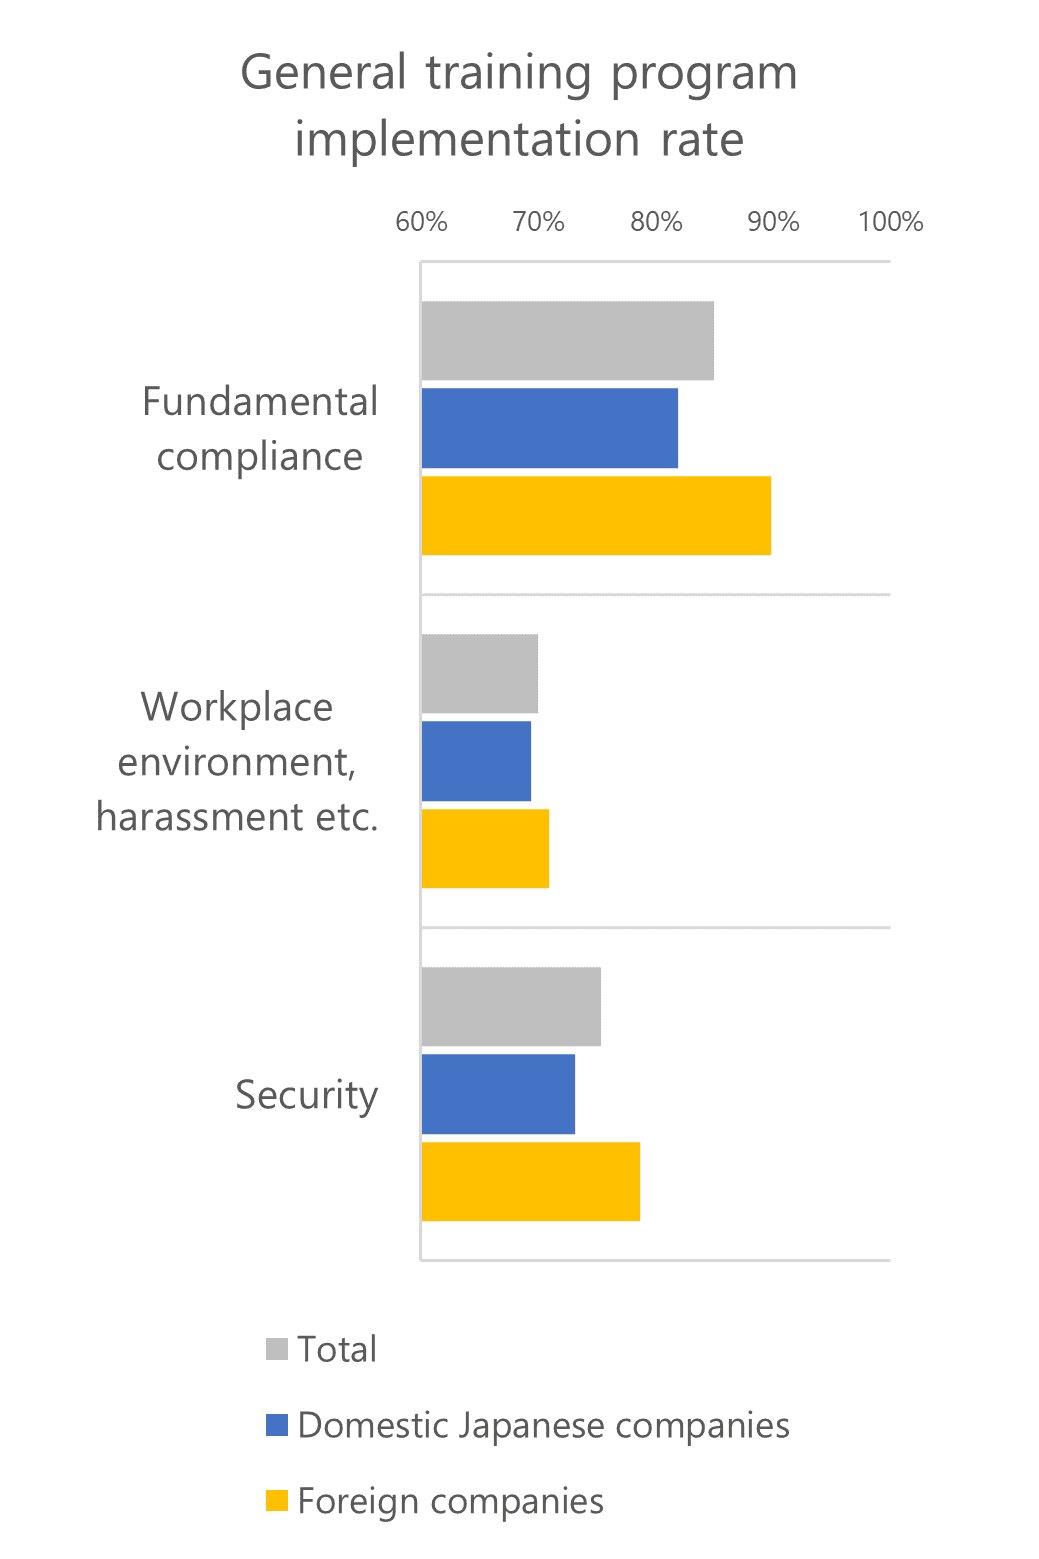 The implementation rate of general training on workplace environment, harassment, security, etc. was higher in foreign companies than in Japanese companies.